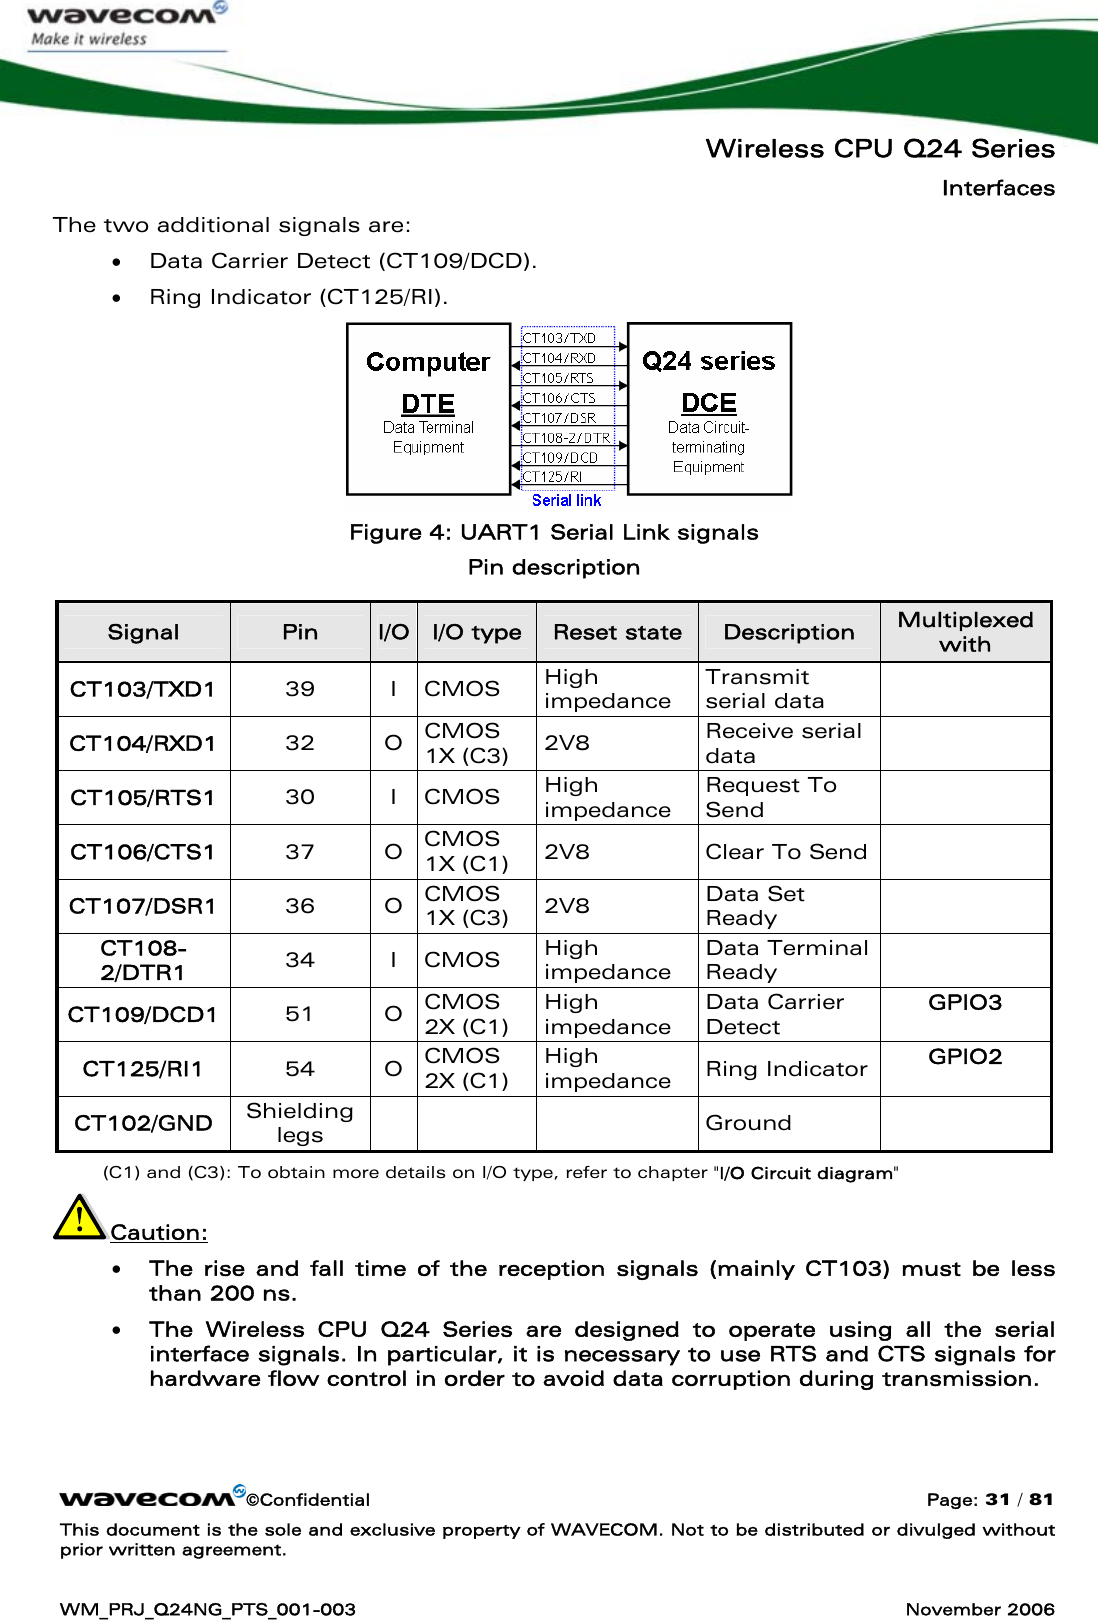   Wireless CPU Q24 Series Interfaces ©Confidential  Page: 31 / 81 This document is the sole and exclusive property of WAVECOM. Not to be distributed or divulged without prior written agreement.  WM_PRJ_Q24NG_PTS_001-003  November 2006  The two additional signals are: • Data Carrier Detect (CT109/DCD). • Ring Indicator (CT125/RI).  Figure 4: UART1 Serial Link signals Pin description Signal  Pin  I/O  I/O type  Reset state  Description  Multiplexed with CT103/TXD1  39 I CMOS High impedance Transmit serial data  CT104/RXD1  32 O CMOS 1X (C3)  2V8  Receive serial data  CT105/RTS1  30 I CMOS High impedance Request To Send  CT106/CTS1  37 O CMOS 1X (C1)  2V8  Clear To Send   CT107/DSR1  36 O CMOS 1X (C3)  2V8  Data Set Ready  CT108-2/DTR1  34 I CMOS High impedance Data Terminal Ready  CT109/DCD1  51 O CMOS 2X (C1) High impedance Data Carrier Detect GPIO3 CT125/RI1   54 O CMOS 2X (C1) High impedance  Ring Indicator  GPIO2 CT102/GND  Shielding legs     Ground    (C1) and (C3): To obtain more details on I/O type, refer to chapter &quot;I/O Circuit diagram&quot; Caution: • The rise and fall time of the reception signals (mainly CT103) must be less than 200 ns. • The Wireless CPU Q24 Series are designed to operate using all the serial interface signals. In particular, it is necessary to use RTS and CTS signals for hardware flow control in order to avoid data corruption during transmission. 